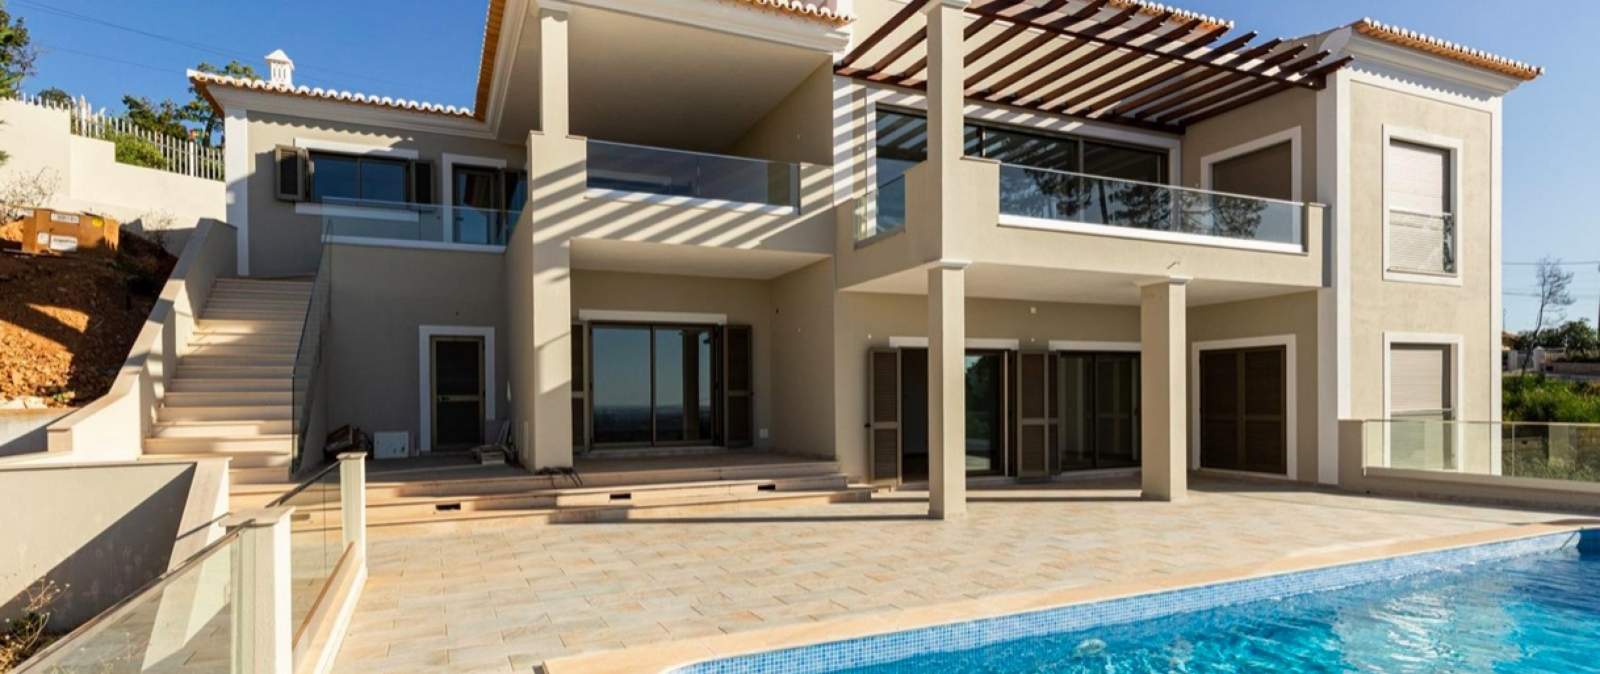 4 Bedroom Villa with swimming pool, new construction, for sale, Monchique, Algarve_191576